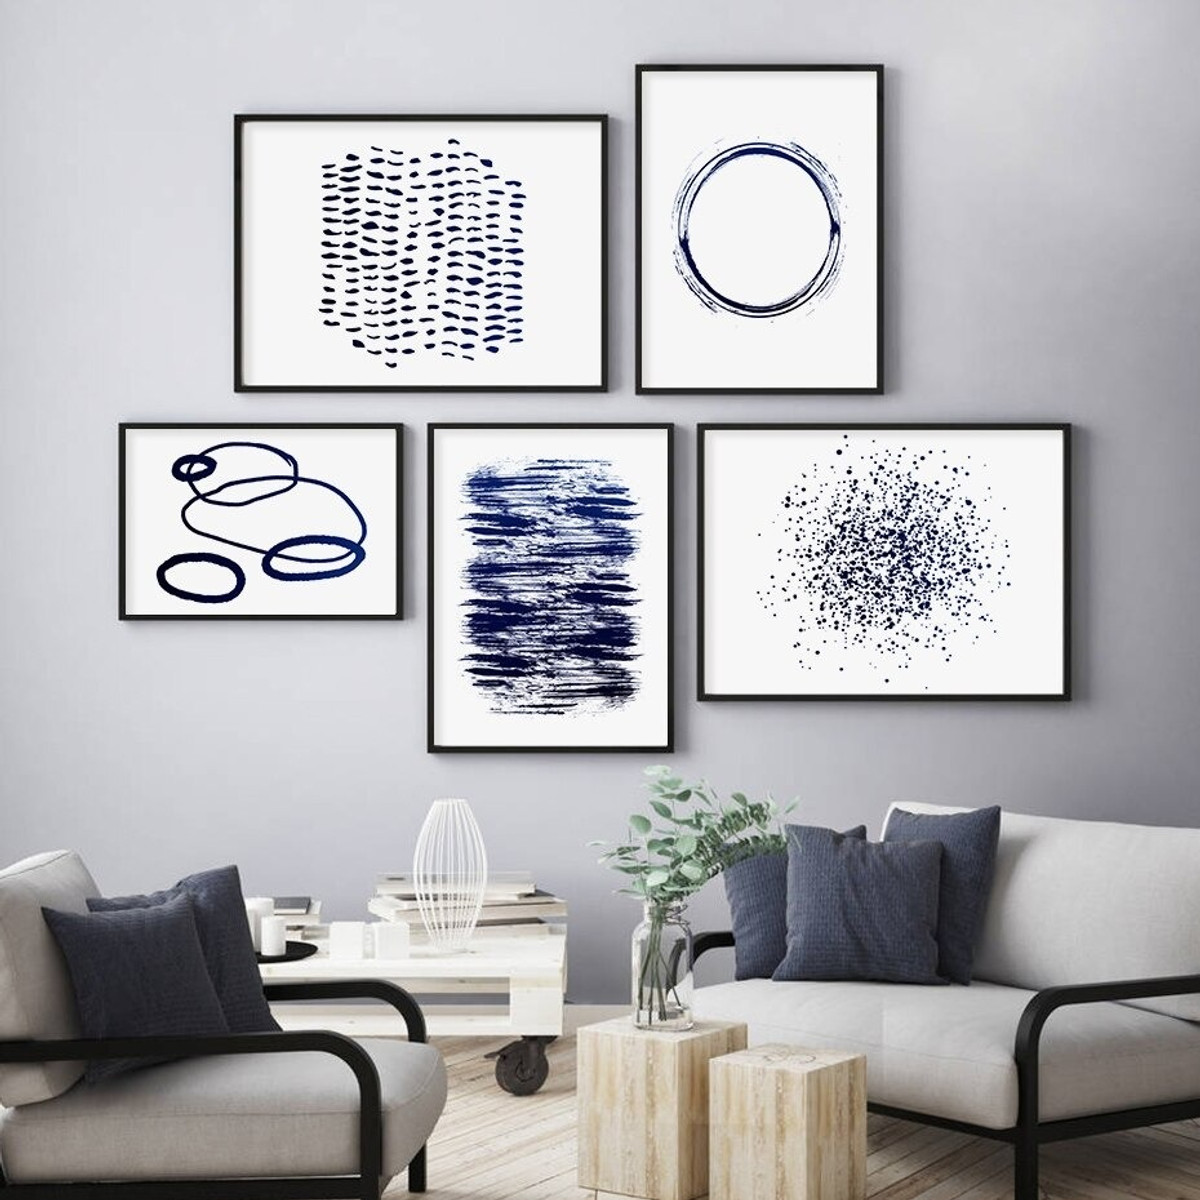 Blue Scansion Points Circles Abstract Geometrical 5 Multi Panel Modern Painting Set Photograph Canvas Print for Room Wall Garnish